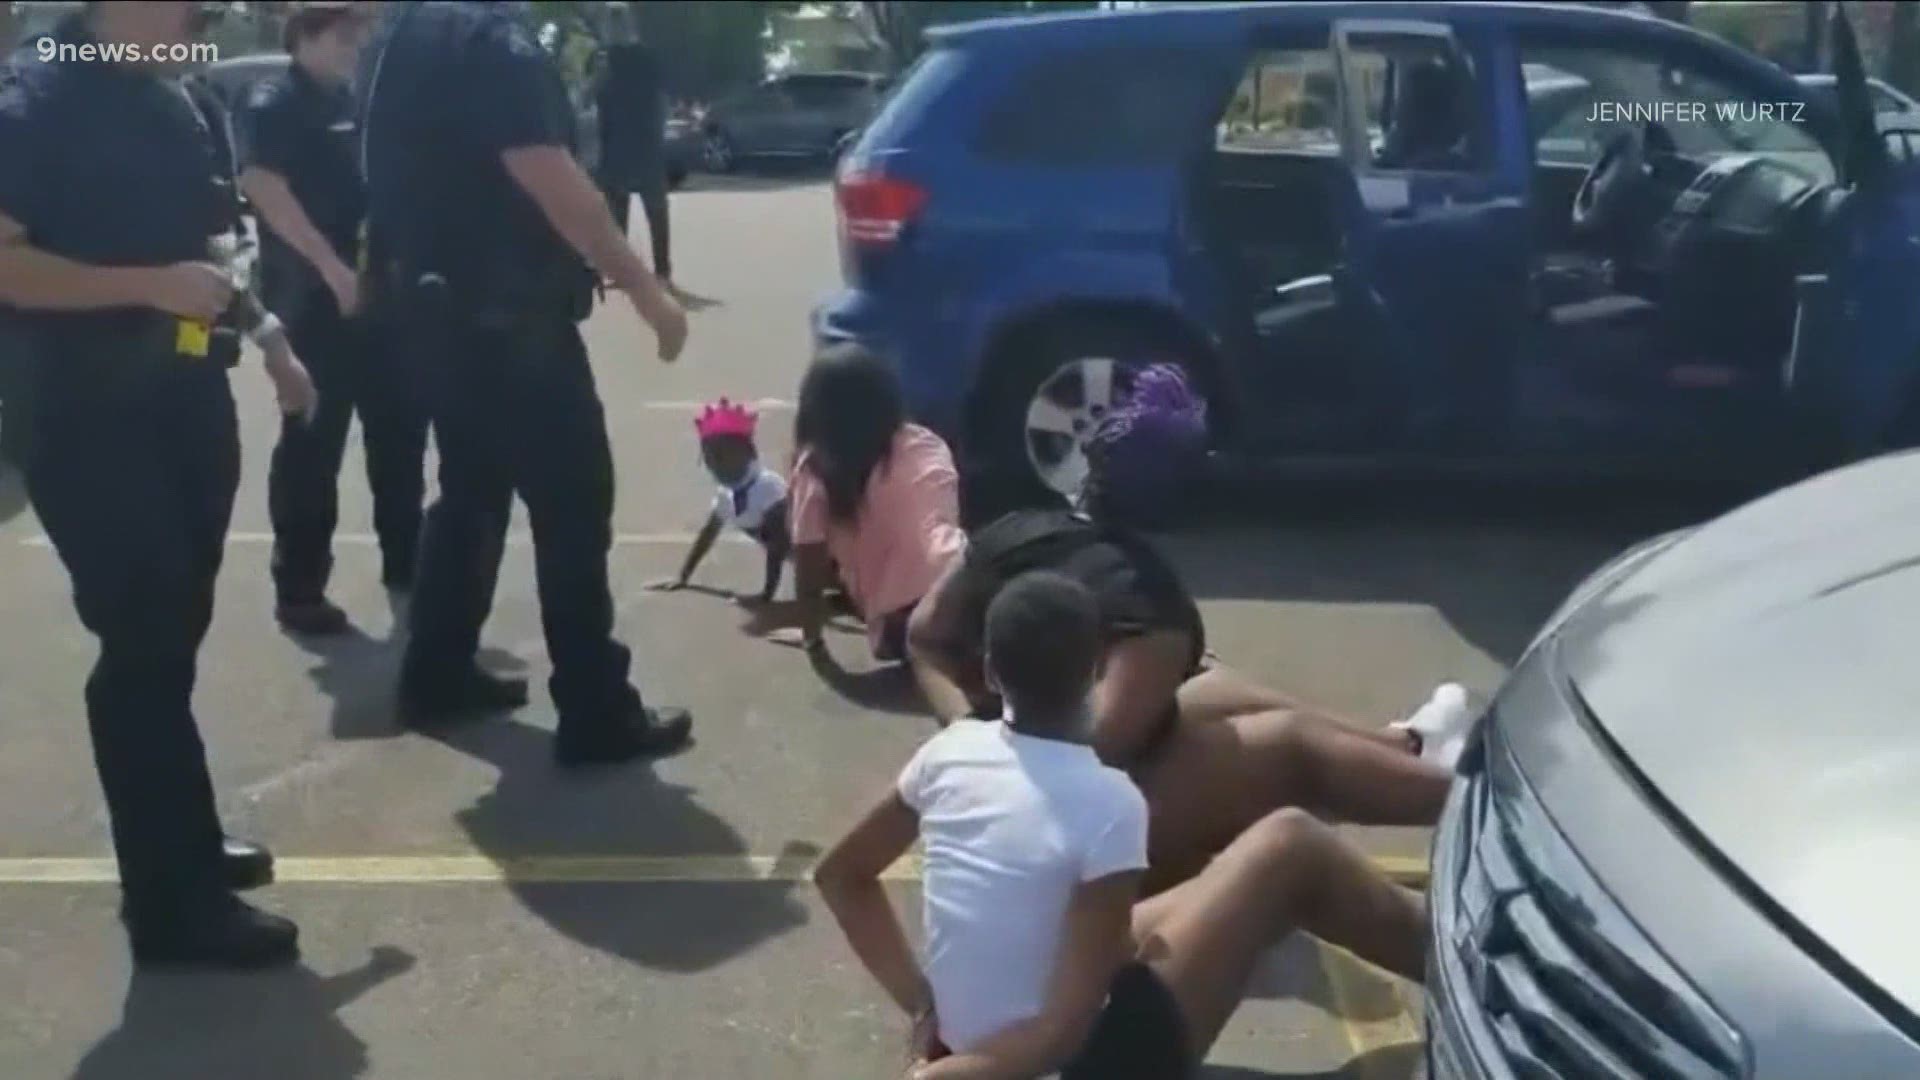 The DA's office said there is no evidence the officers acted criminally when they detained a family, including four children, in the August 2020 incident.